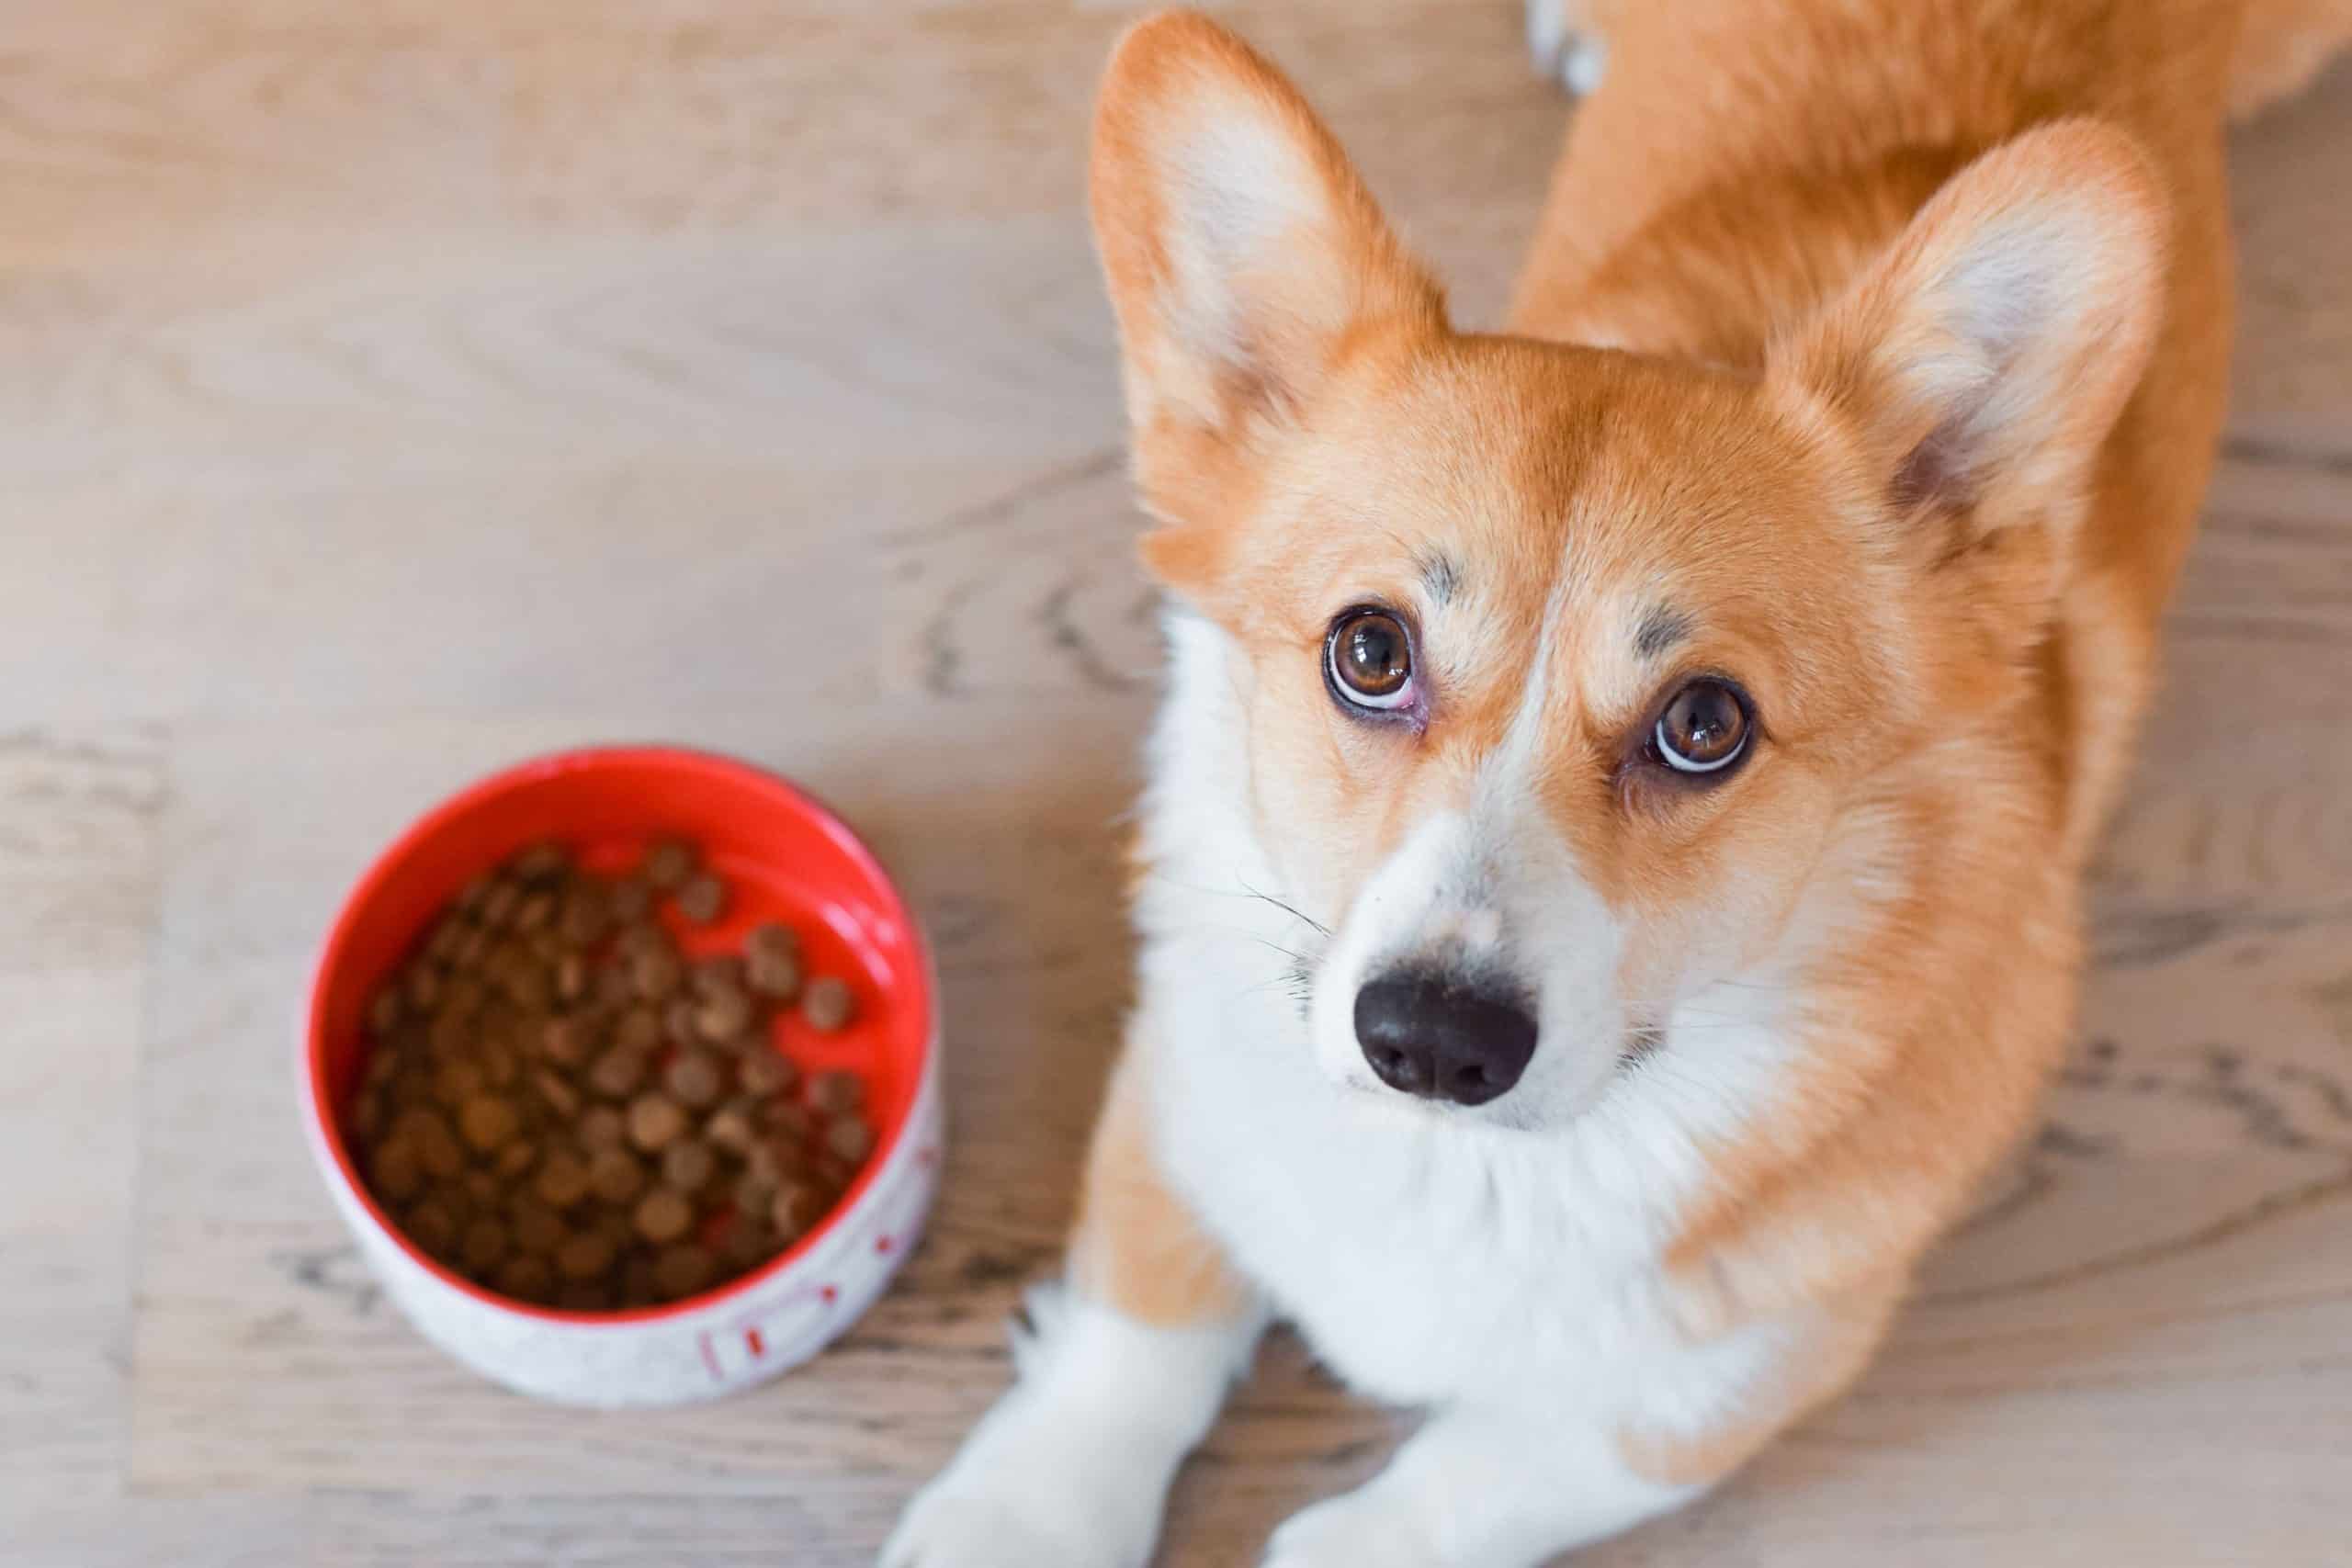 Pembroke Welsh Corgi sits by food bowl. When dogs get sick, it can be difficult to get them to eat. Make sure you give your dog the most nutritious food to help them recover.